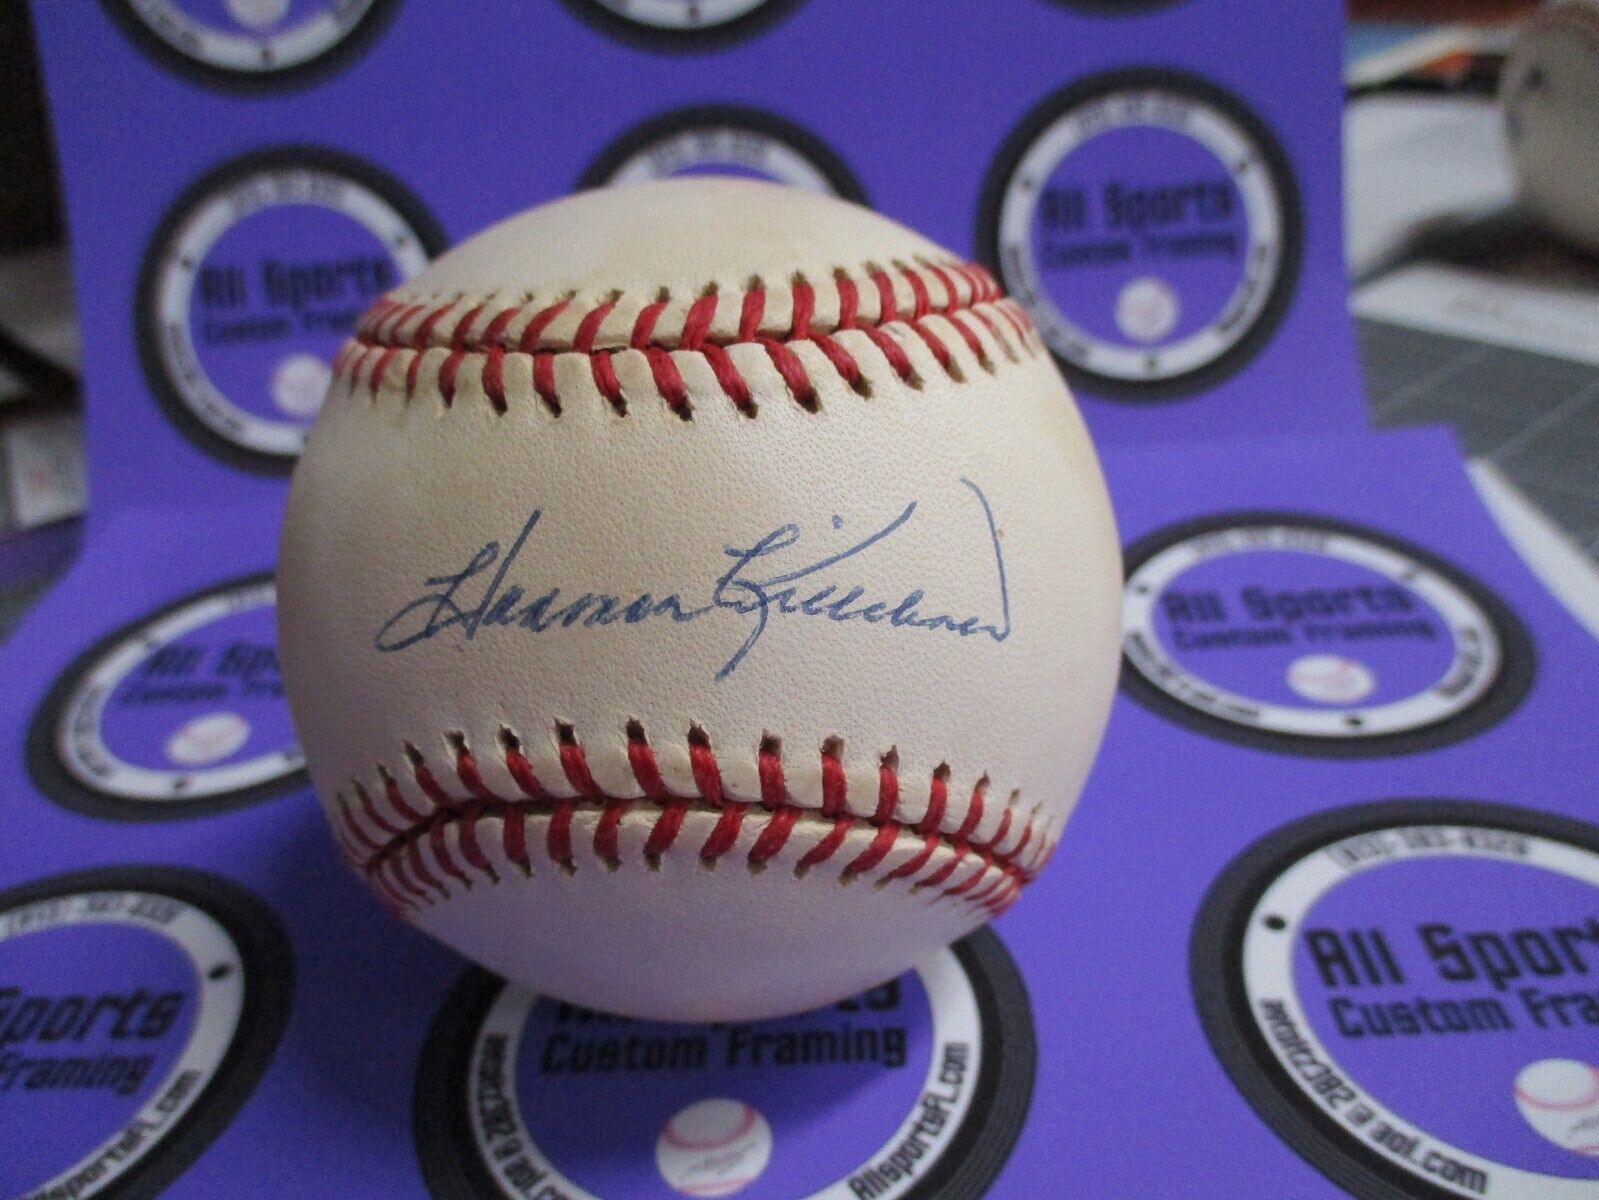 Harmon Killebrew Autographed Baseball Authenticated by JSA #AD60425